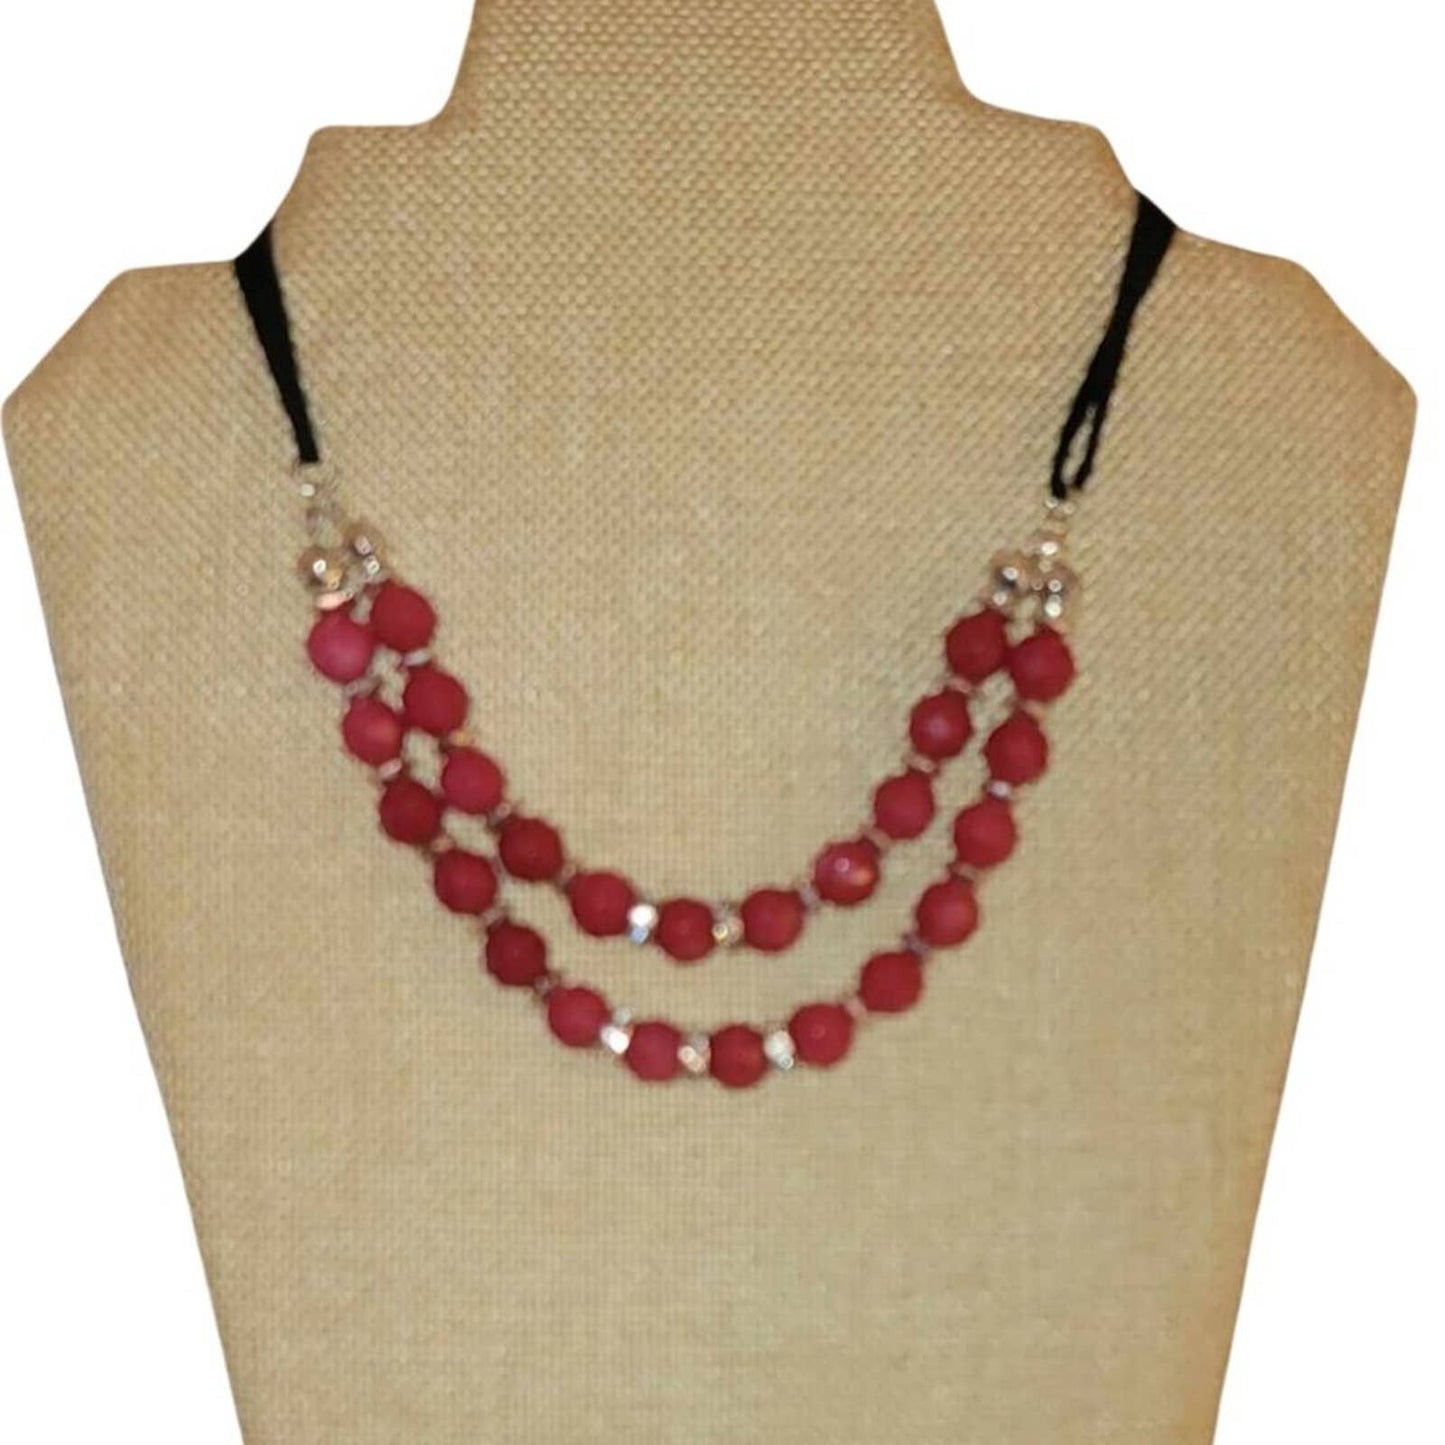 WHBM White House Black Market Double Strand Red Jade Necklace NWT